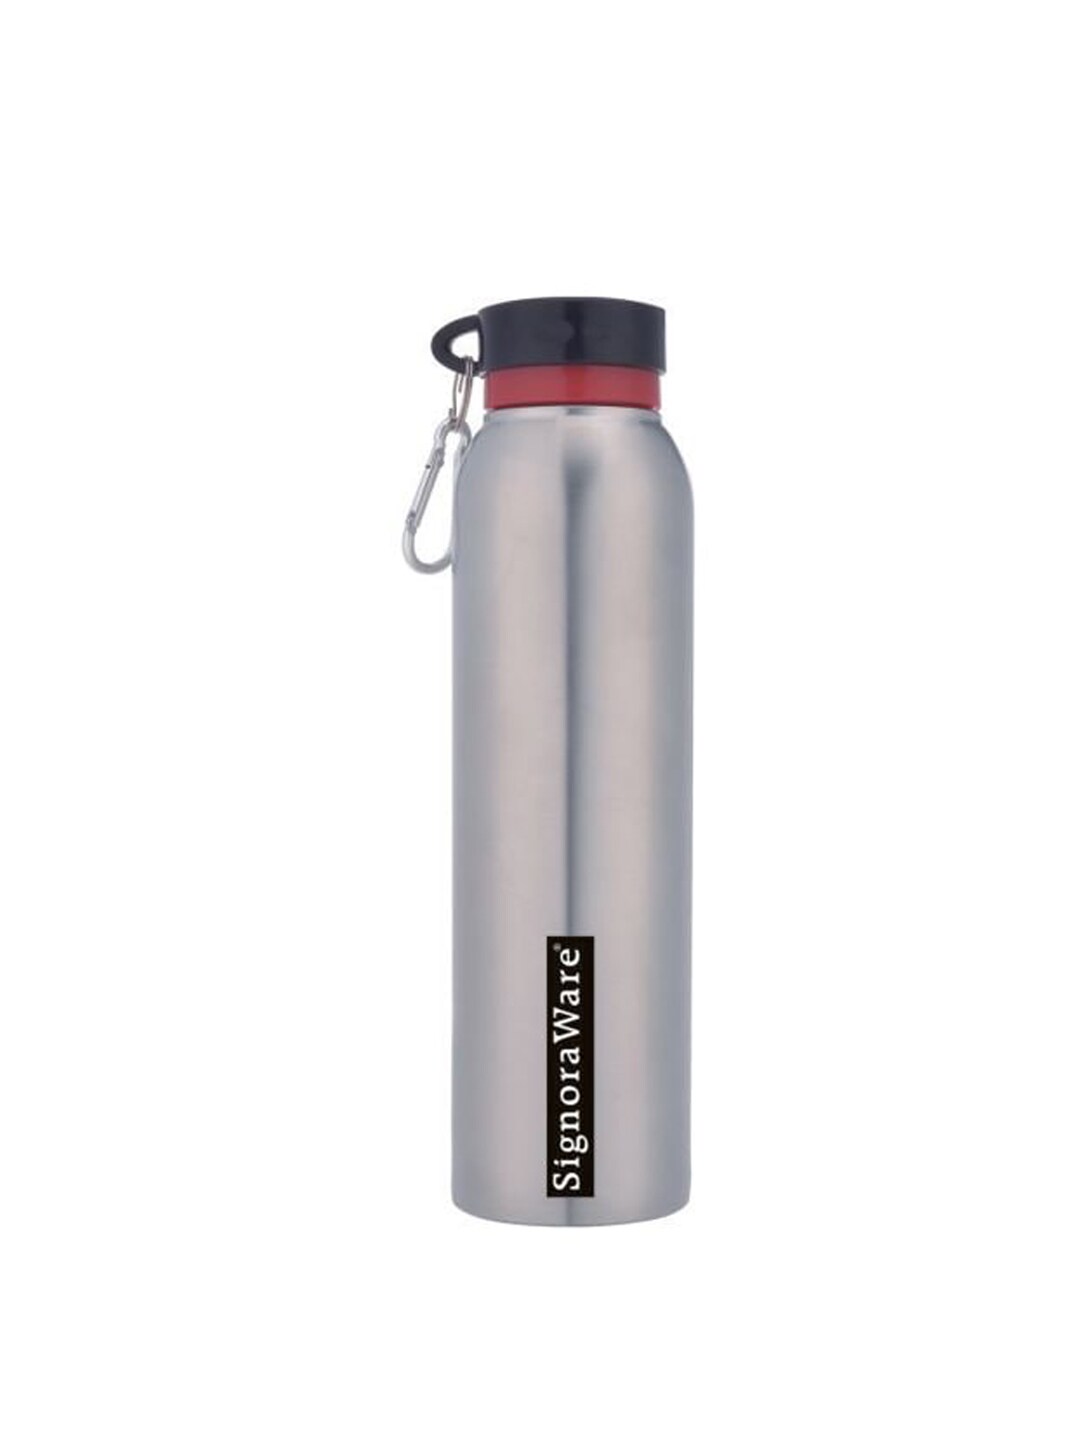 SignoraWare Silver-Toned Solid Water Bottle 750 ML Price in India